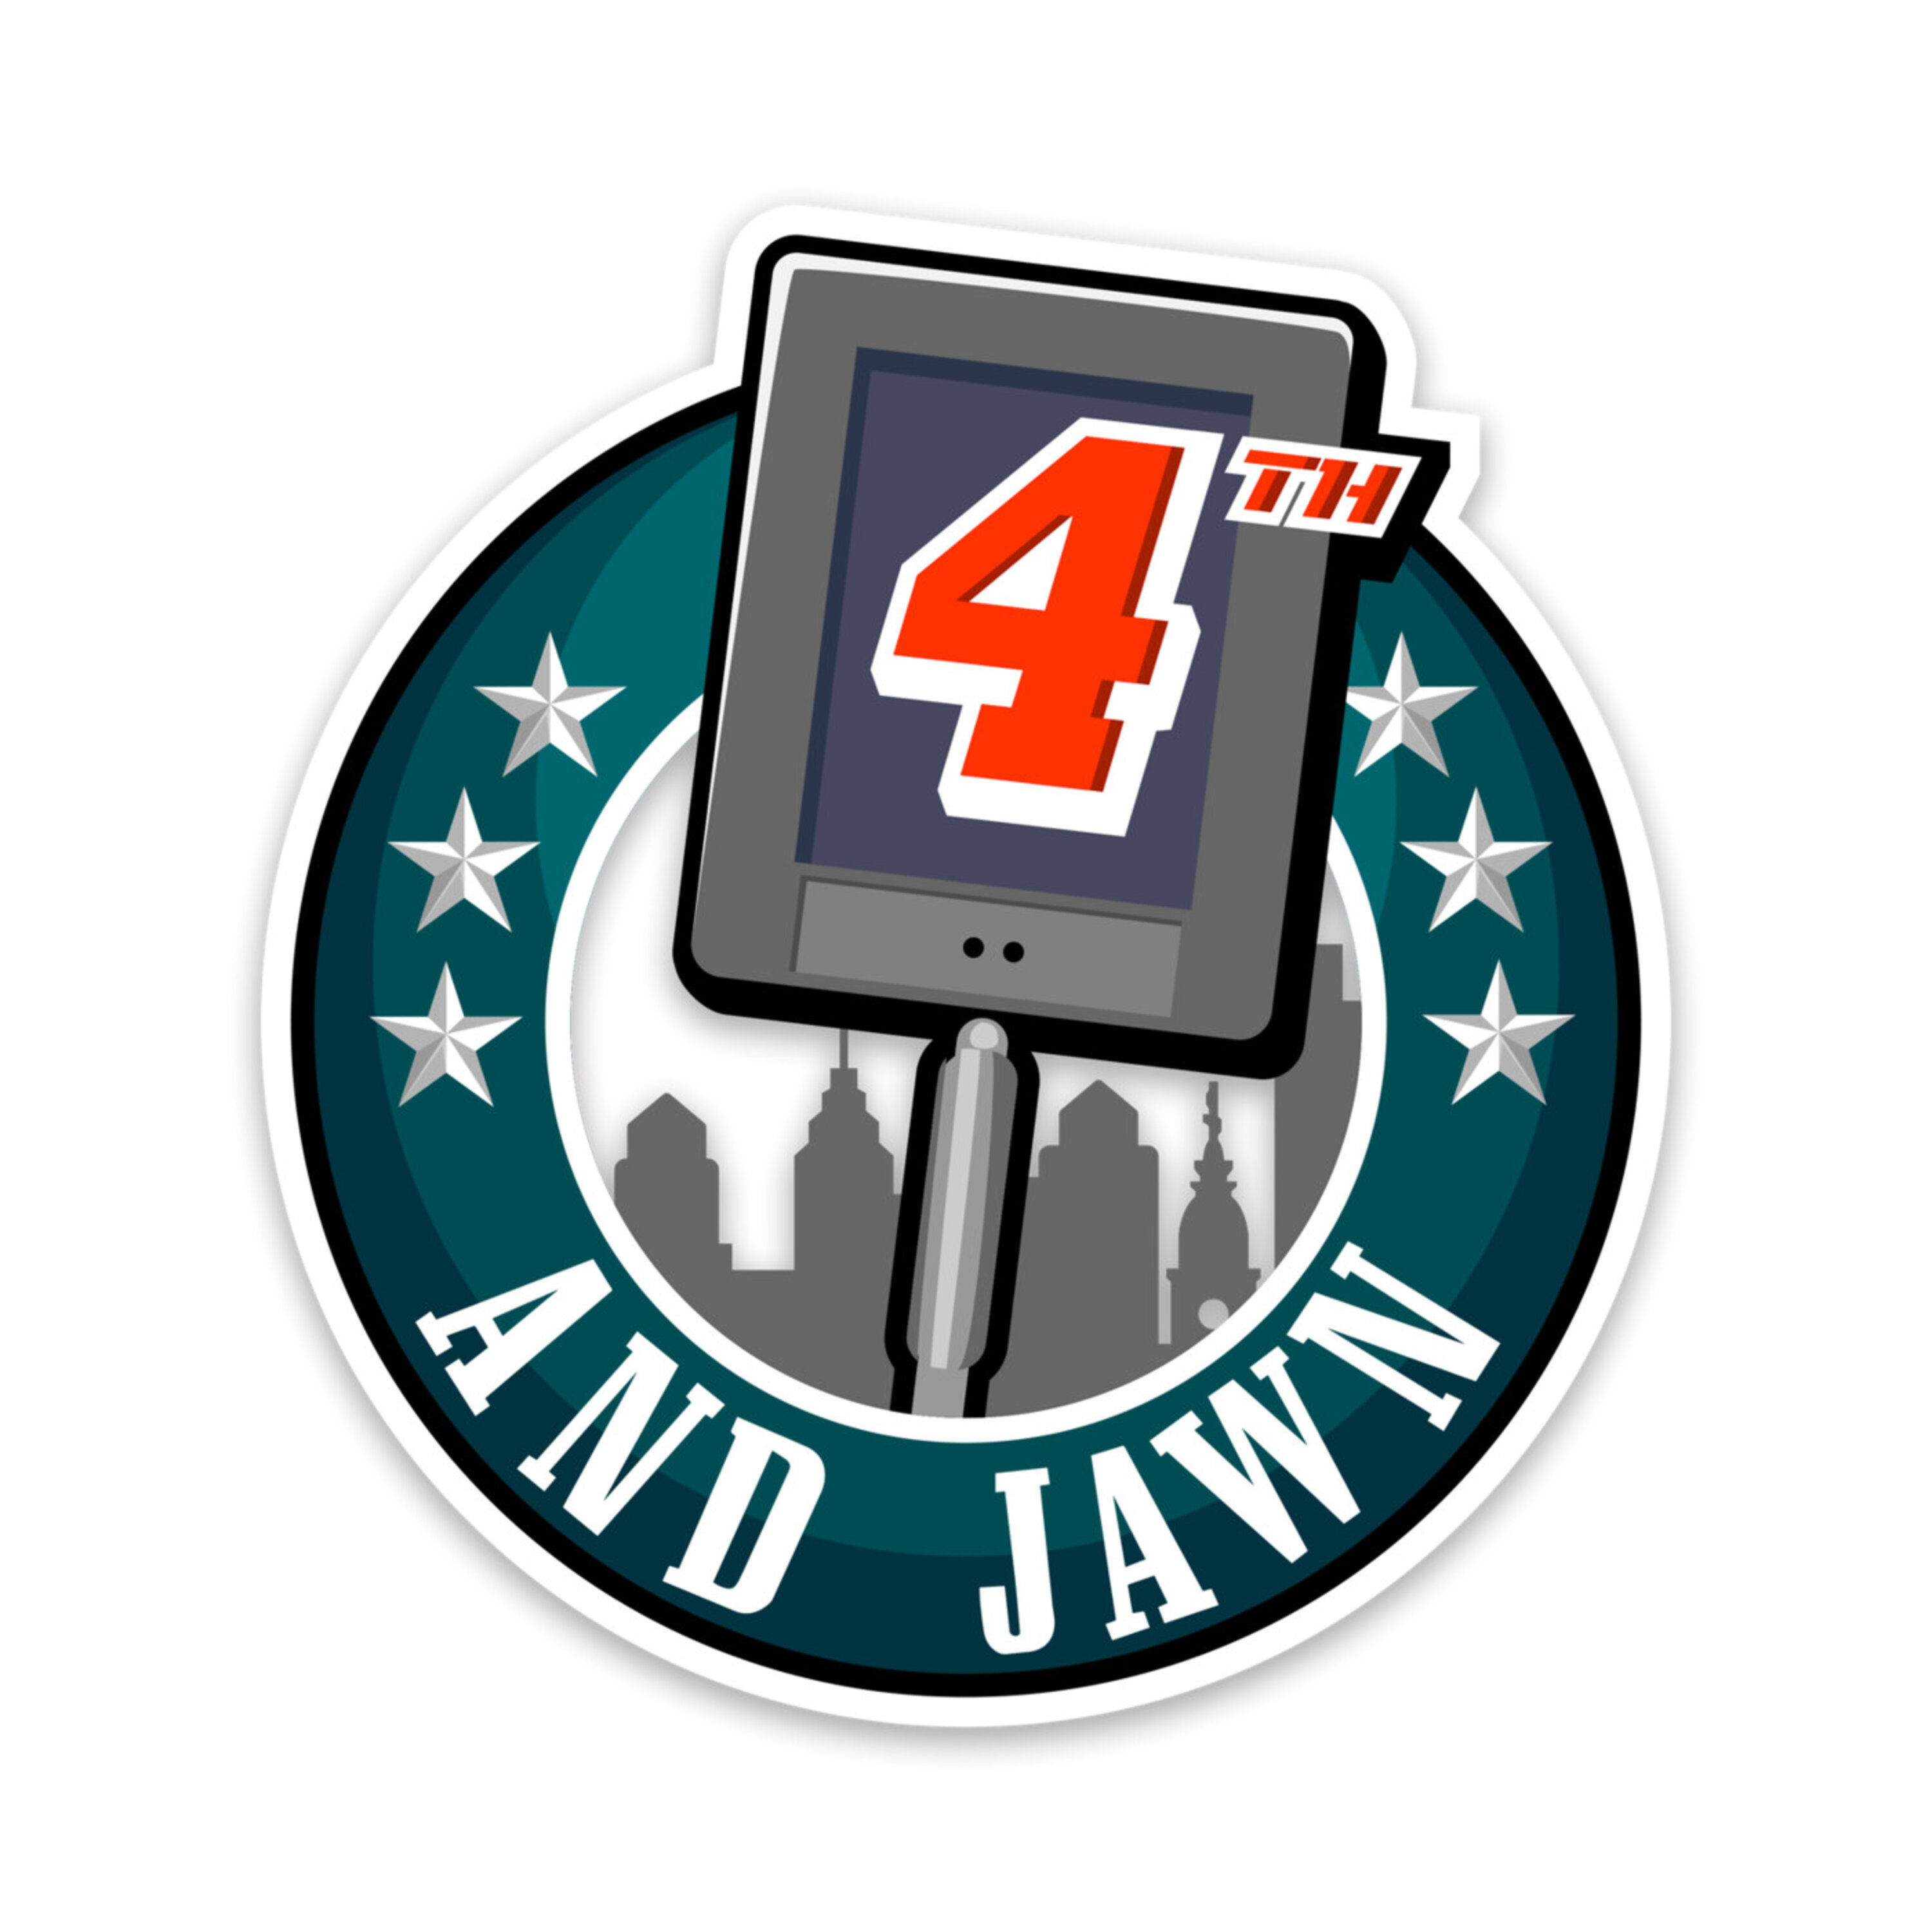 4th and Jawn - Episode 229 - It's Dallas Week